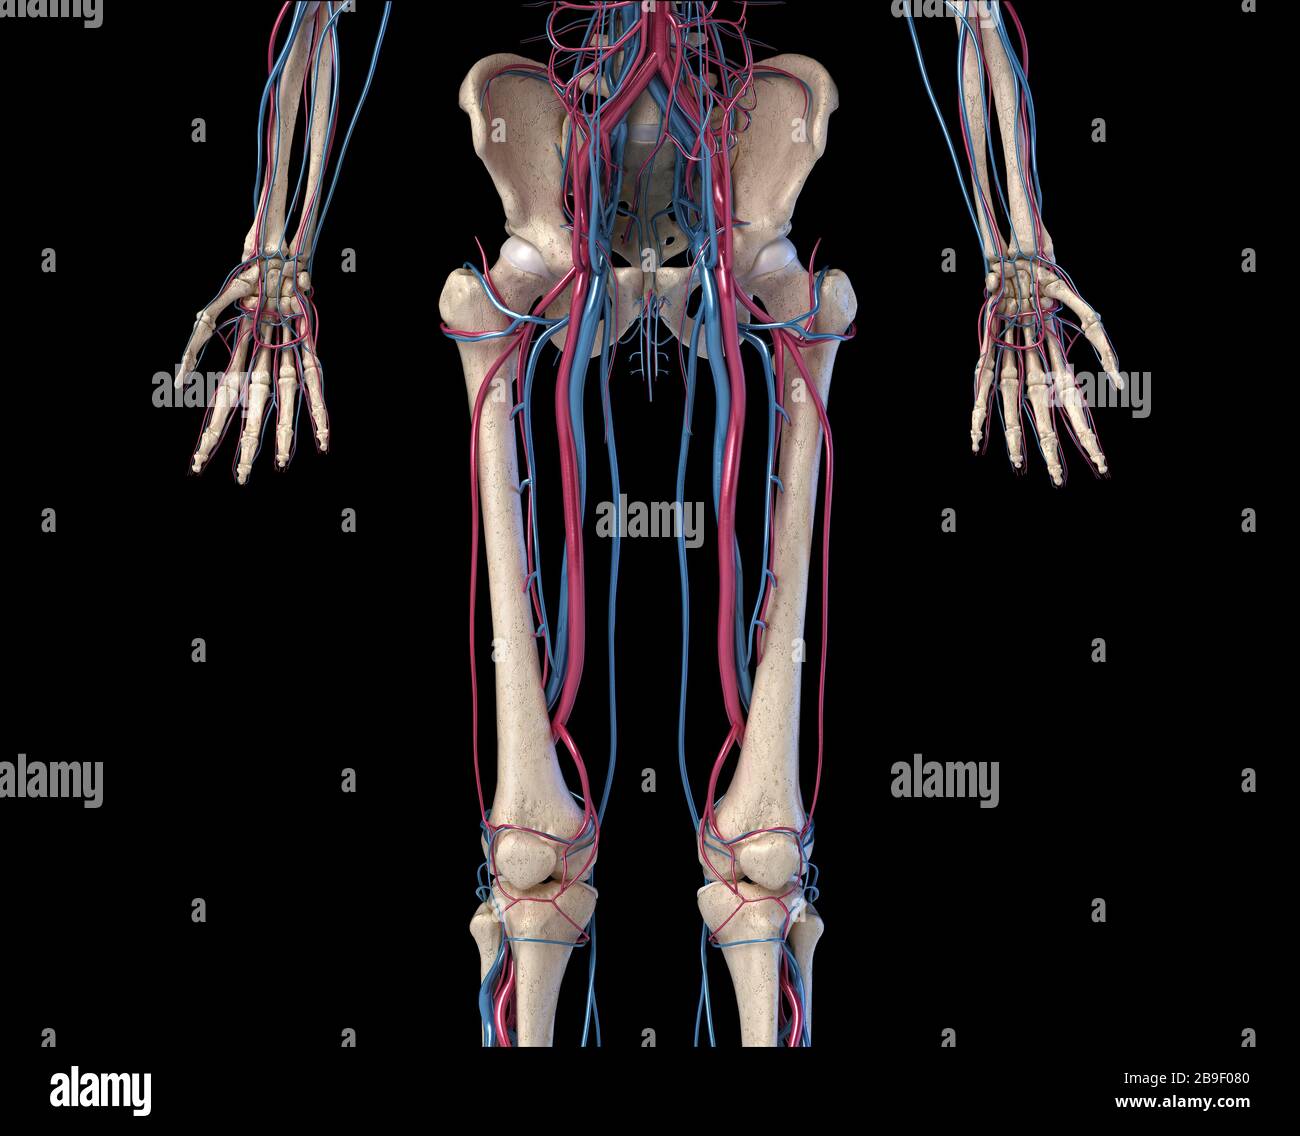 Front view of hip, limbs and hands of skeletal system with veins and arteries, black background. Stock Photo